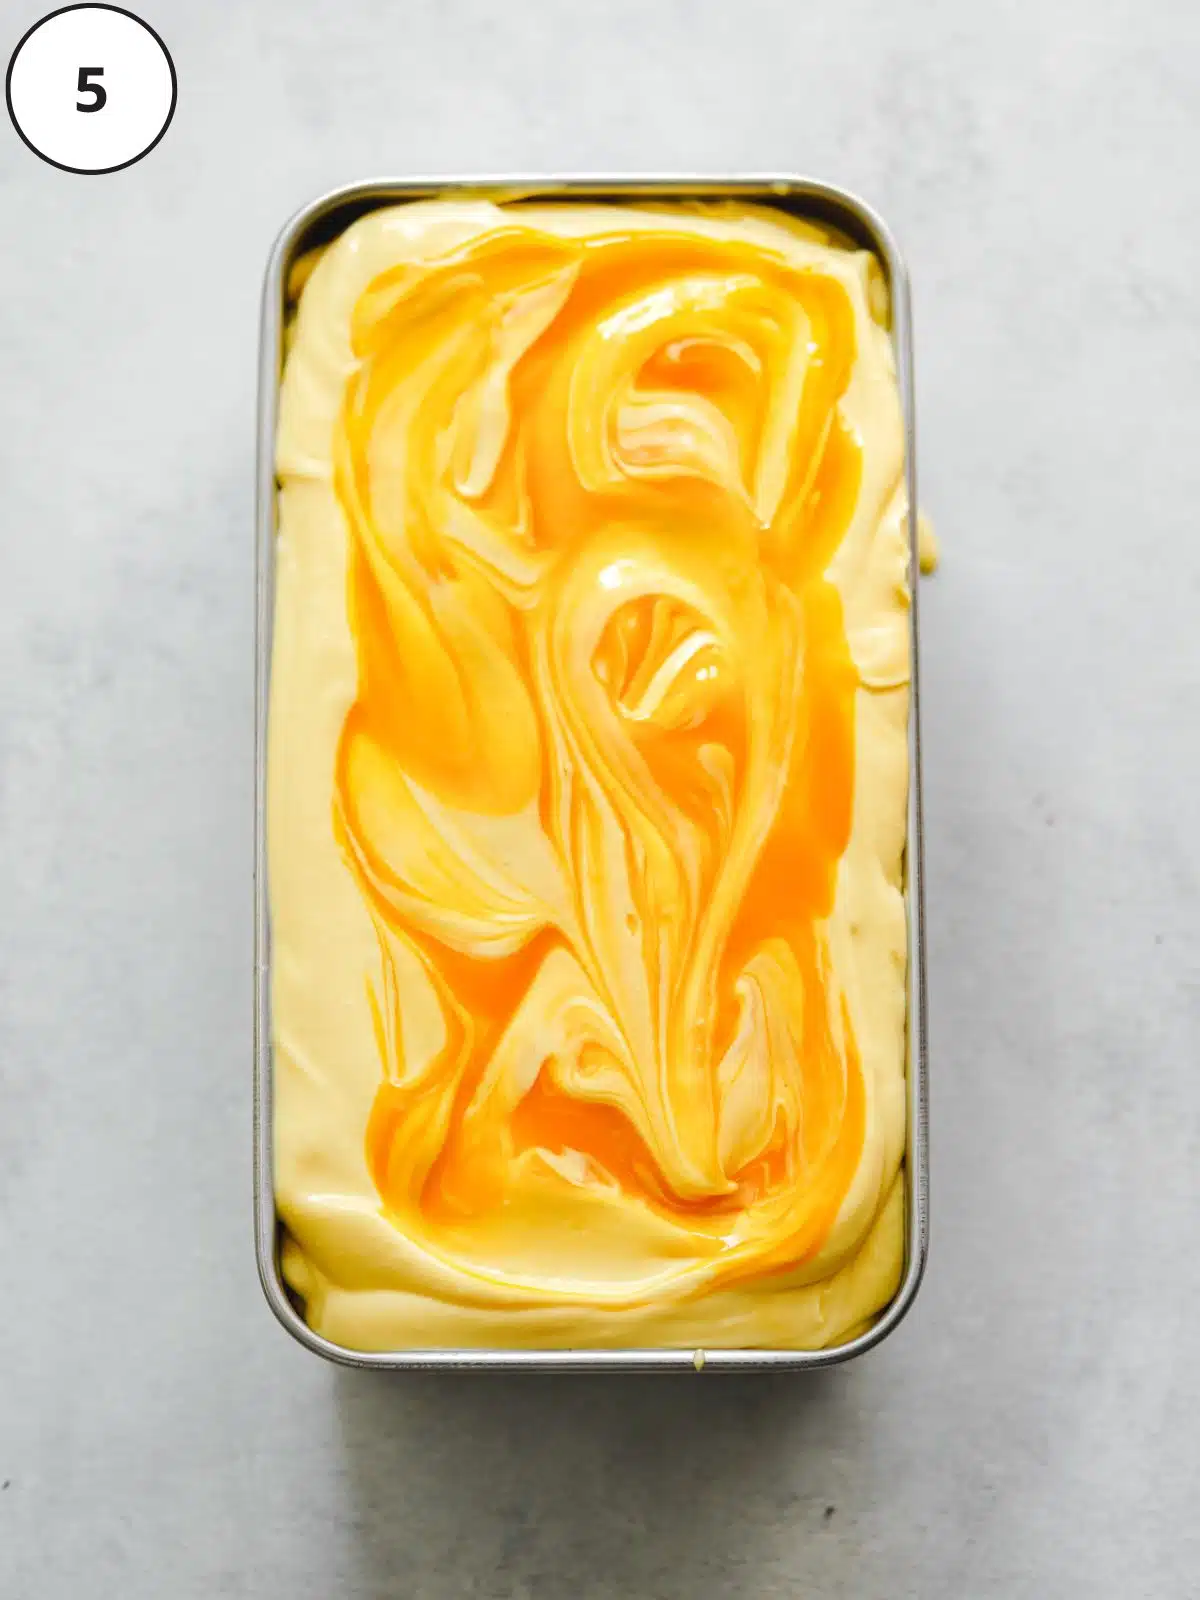 mango ice cream in a metal container.